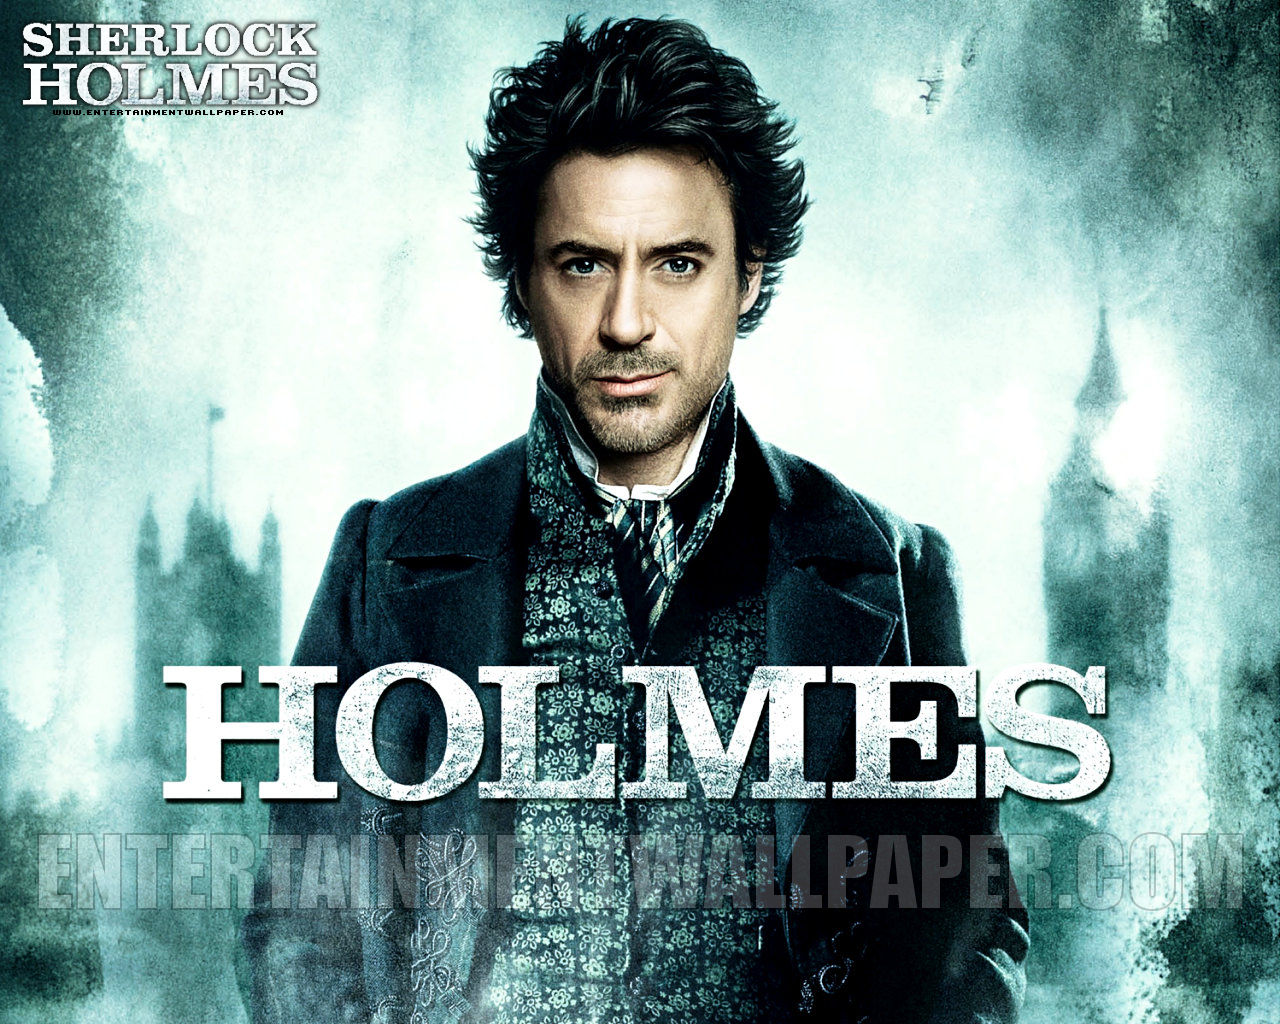 Movie Backgrounds, 651170 Sherlock Holmes Movie Wallpapers, by